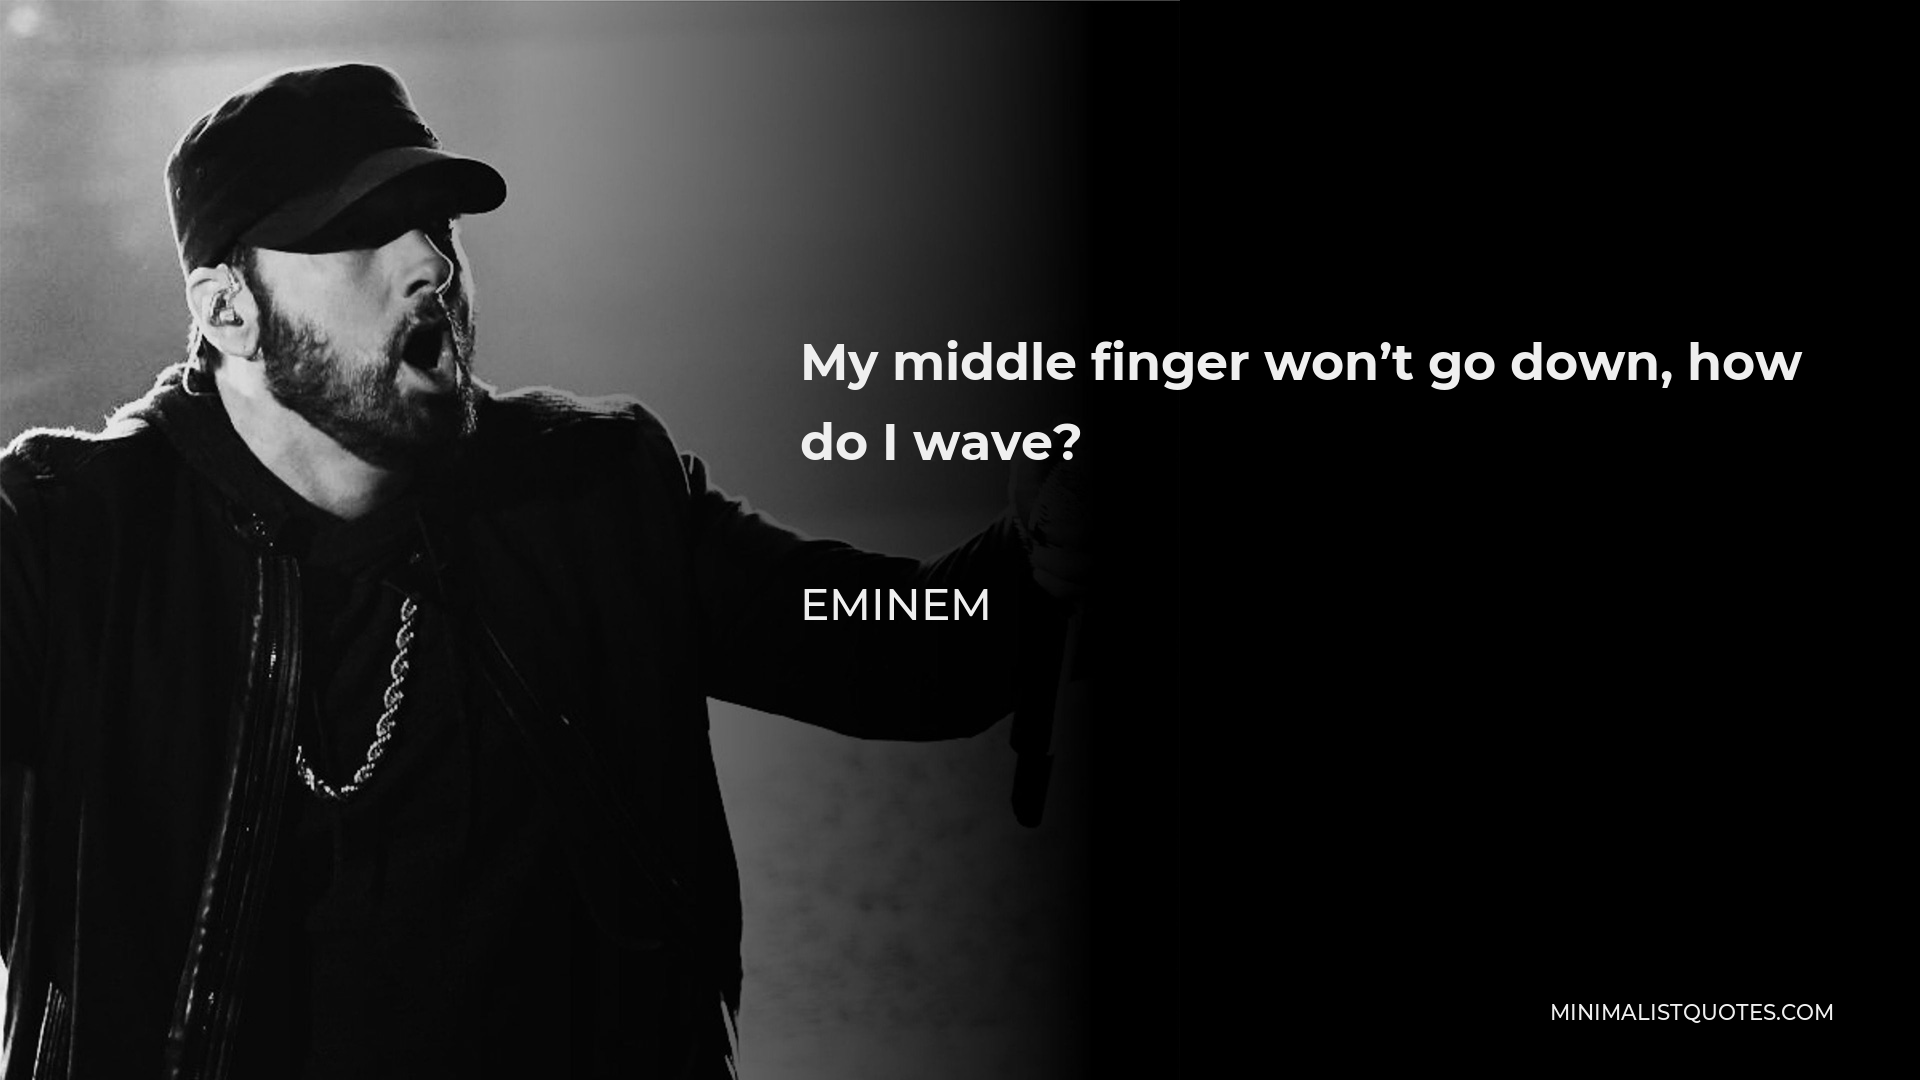 Eminem Quote - My middle finger won’t go down, how do I wave?